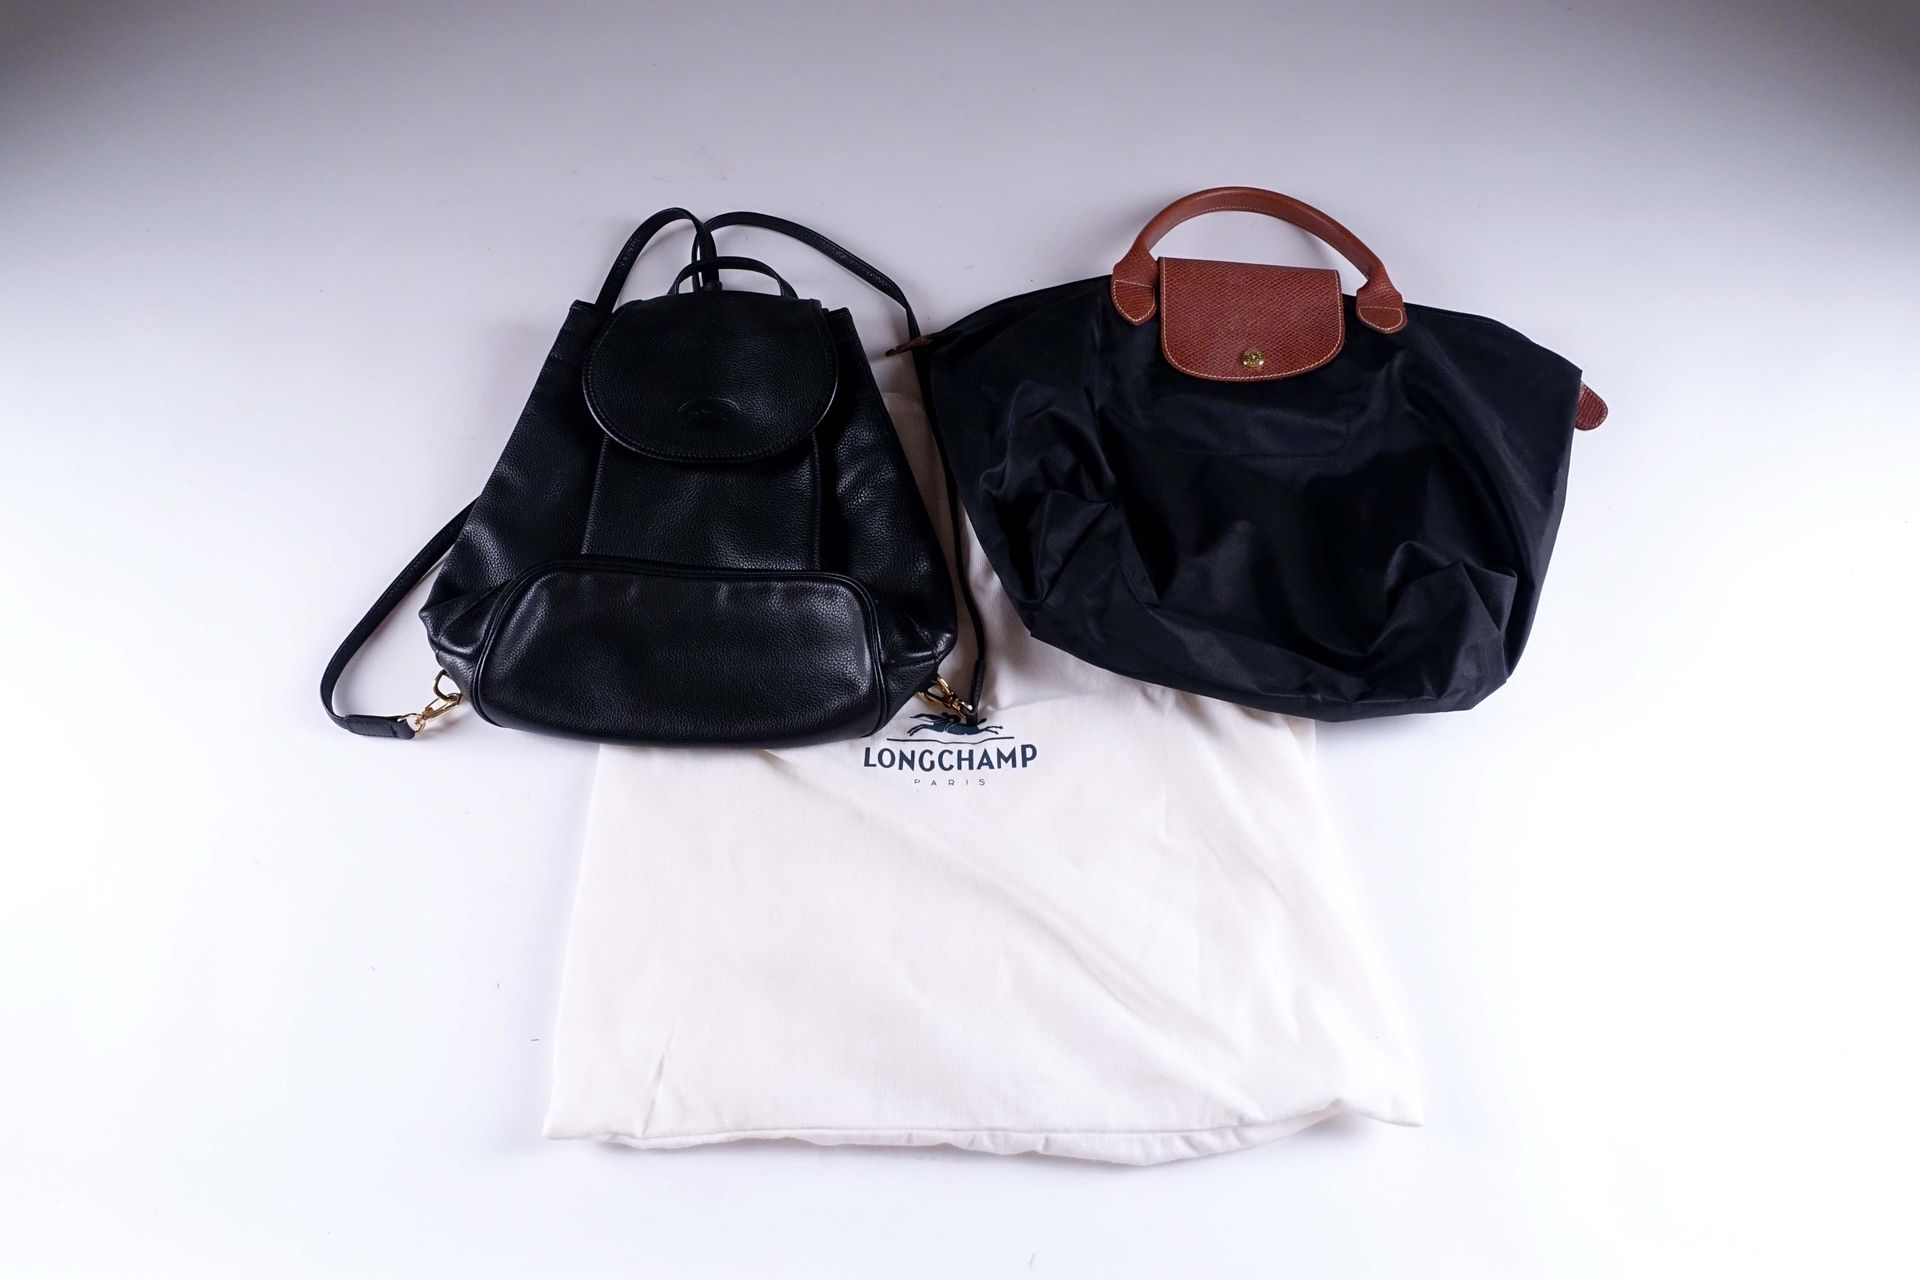 LONGCHAMP. Black leather backpack with gold metal fittings. We join a bag in pla&hellip;